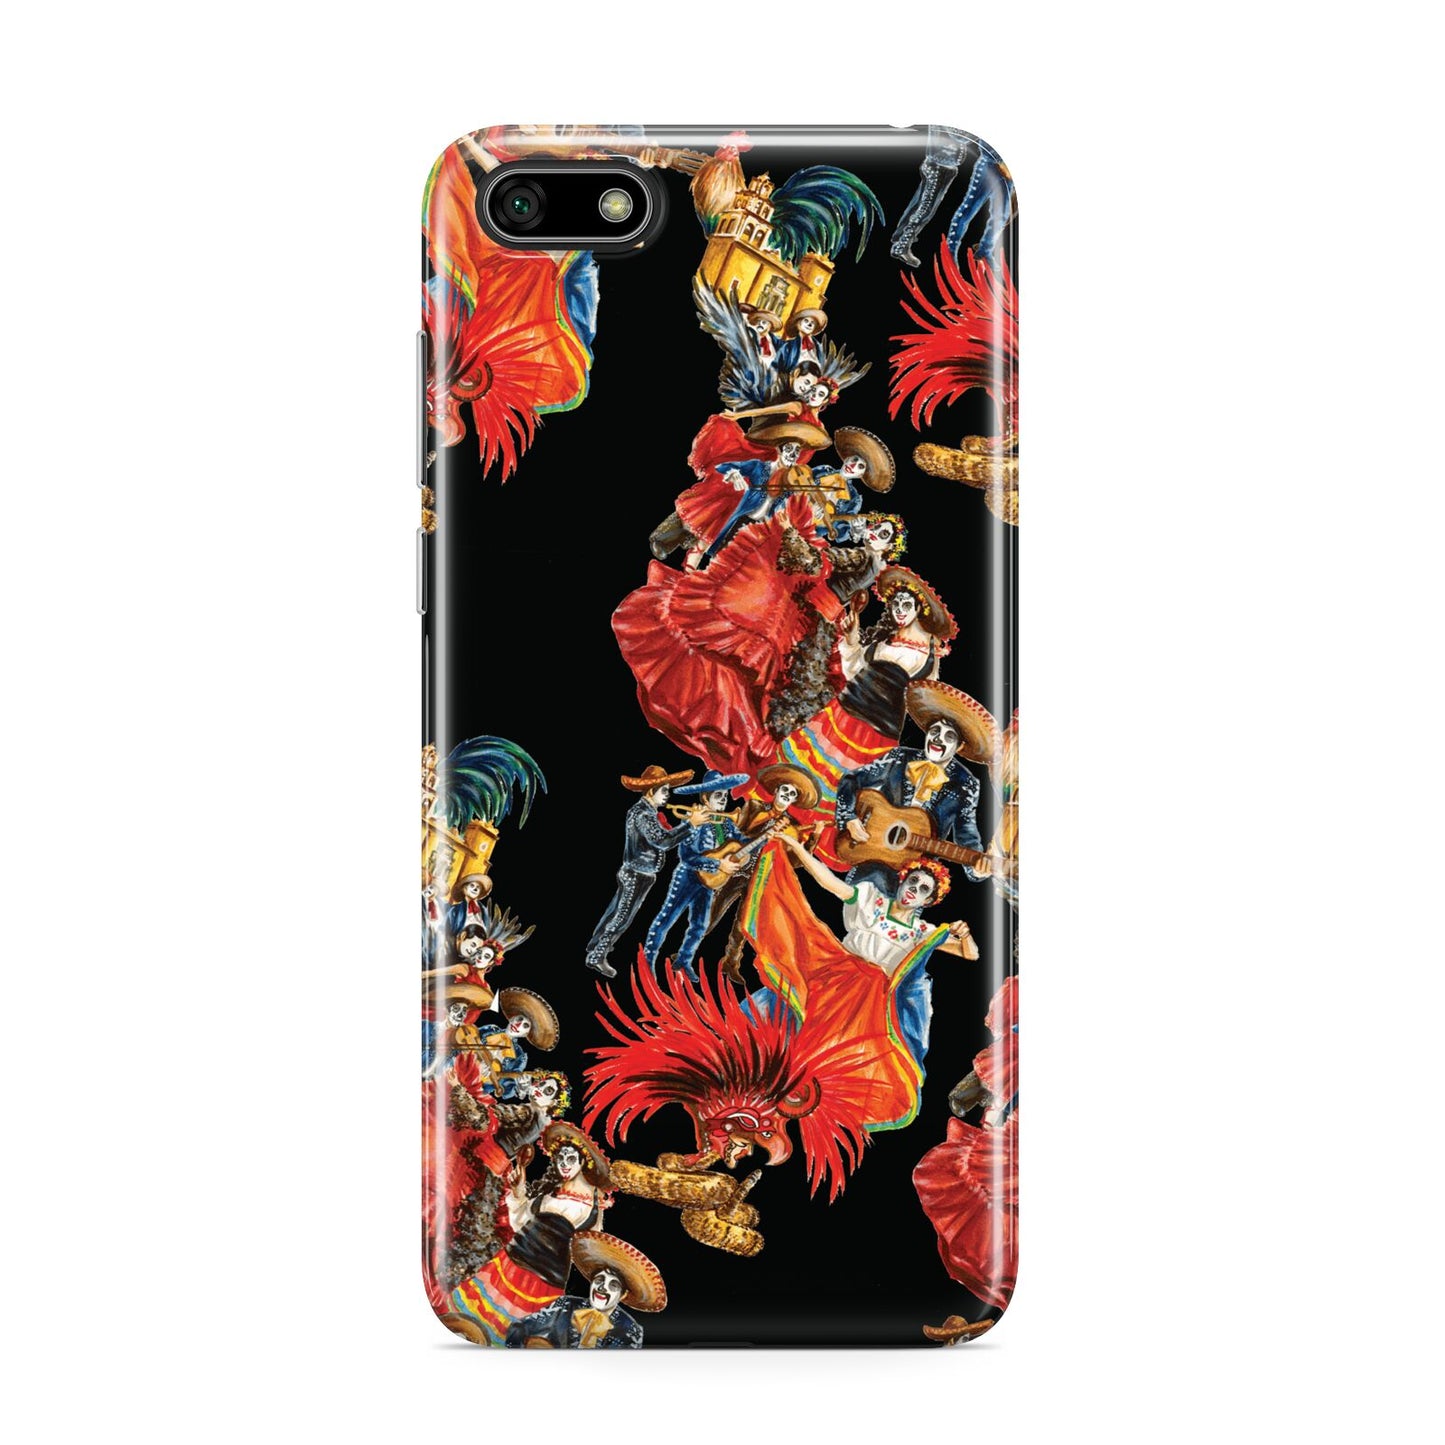 Day of the Dead Festival Huawei Y5 Prime 2018 Phone Case